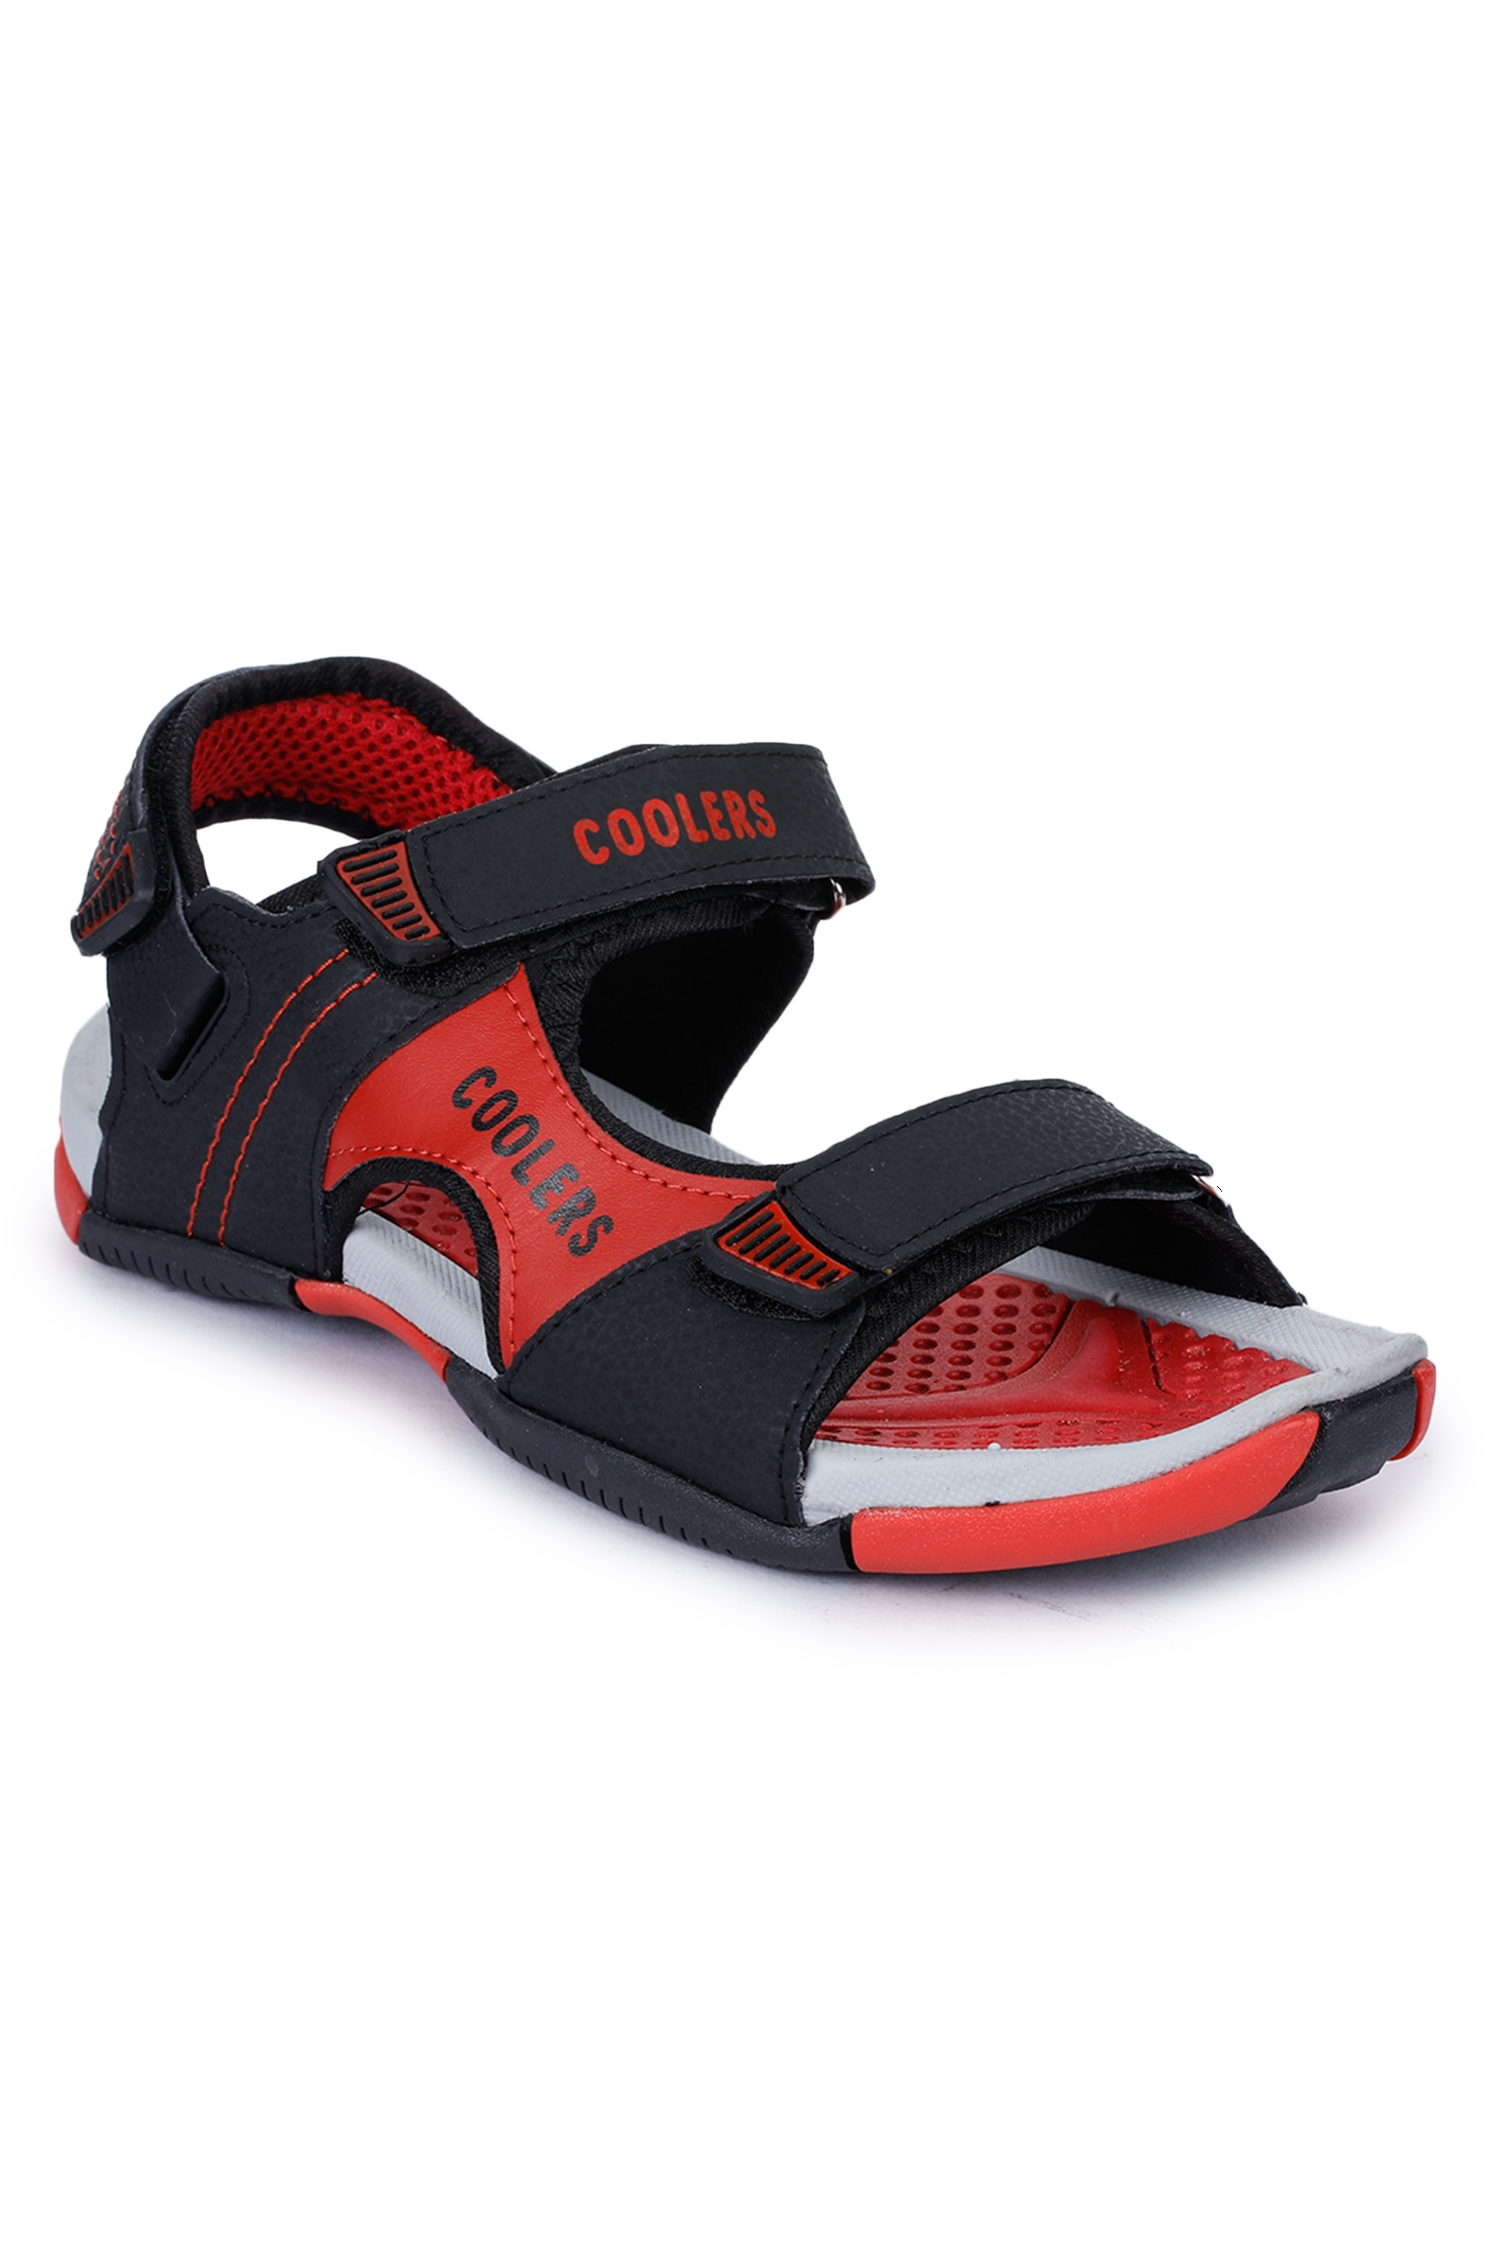 Liberty | Liberty Coolers Red Sports Sandals LXI-11_Red For - Men